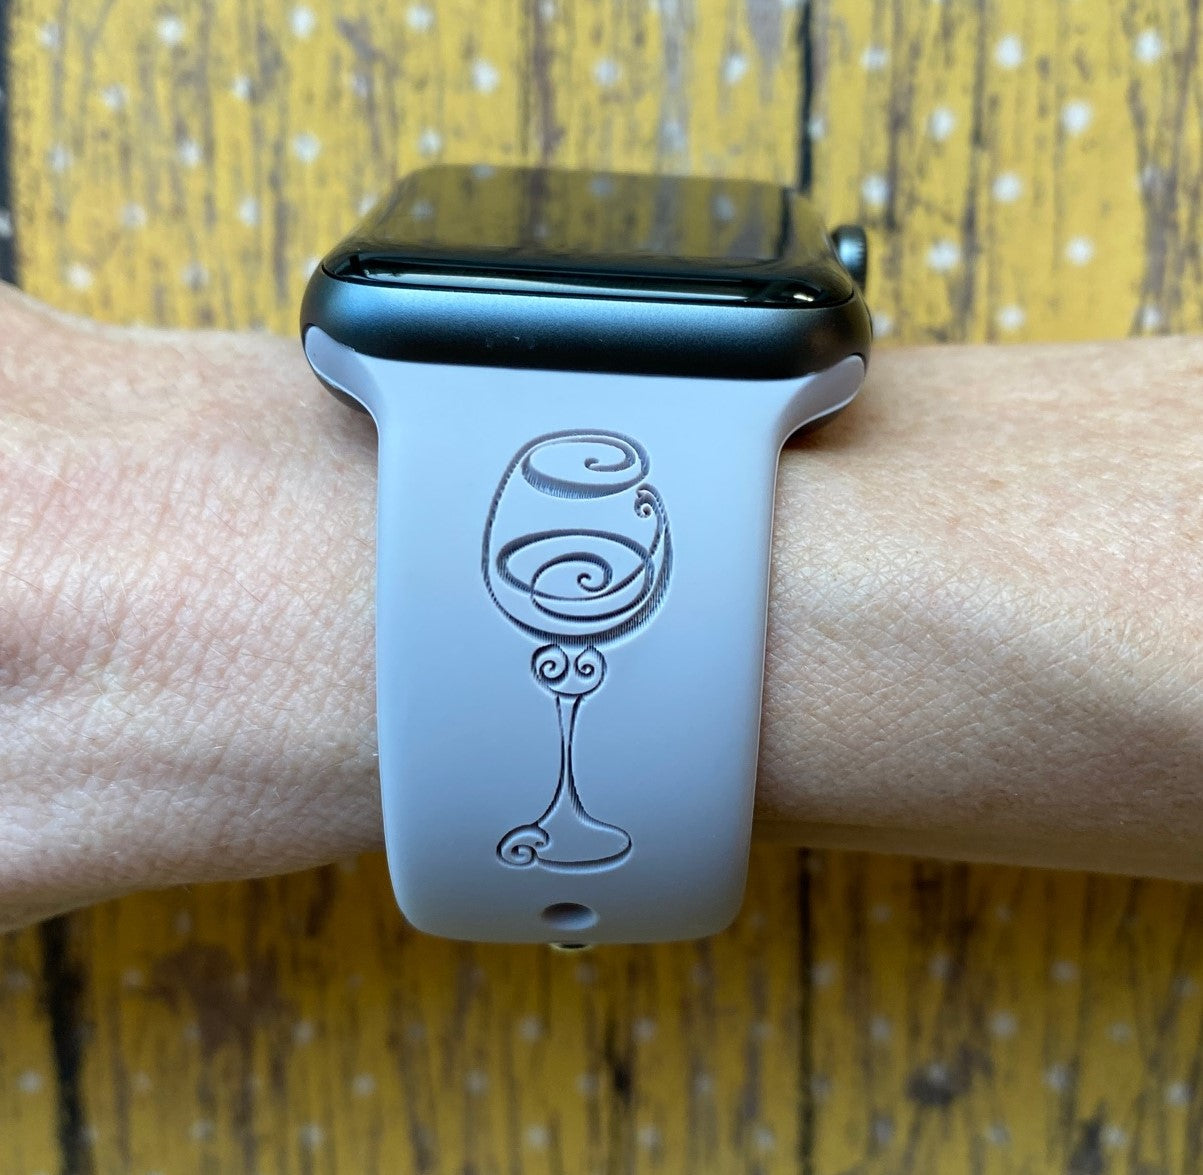 Wine Makes Everything Better Apple Watch Band